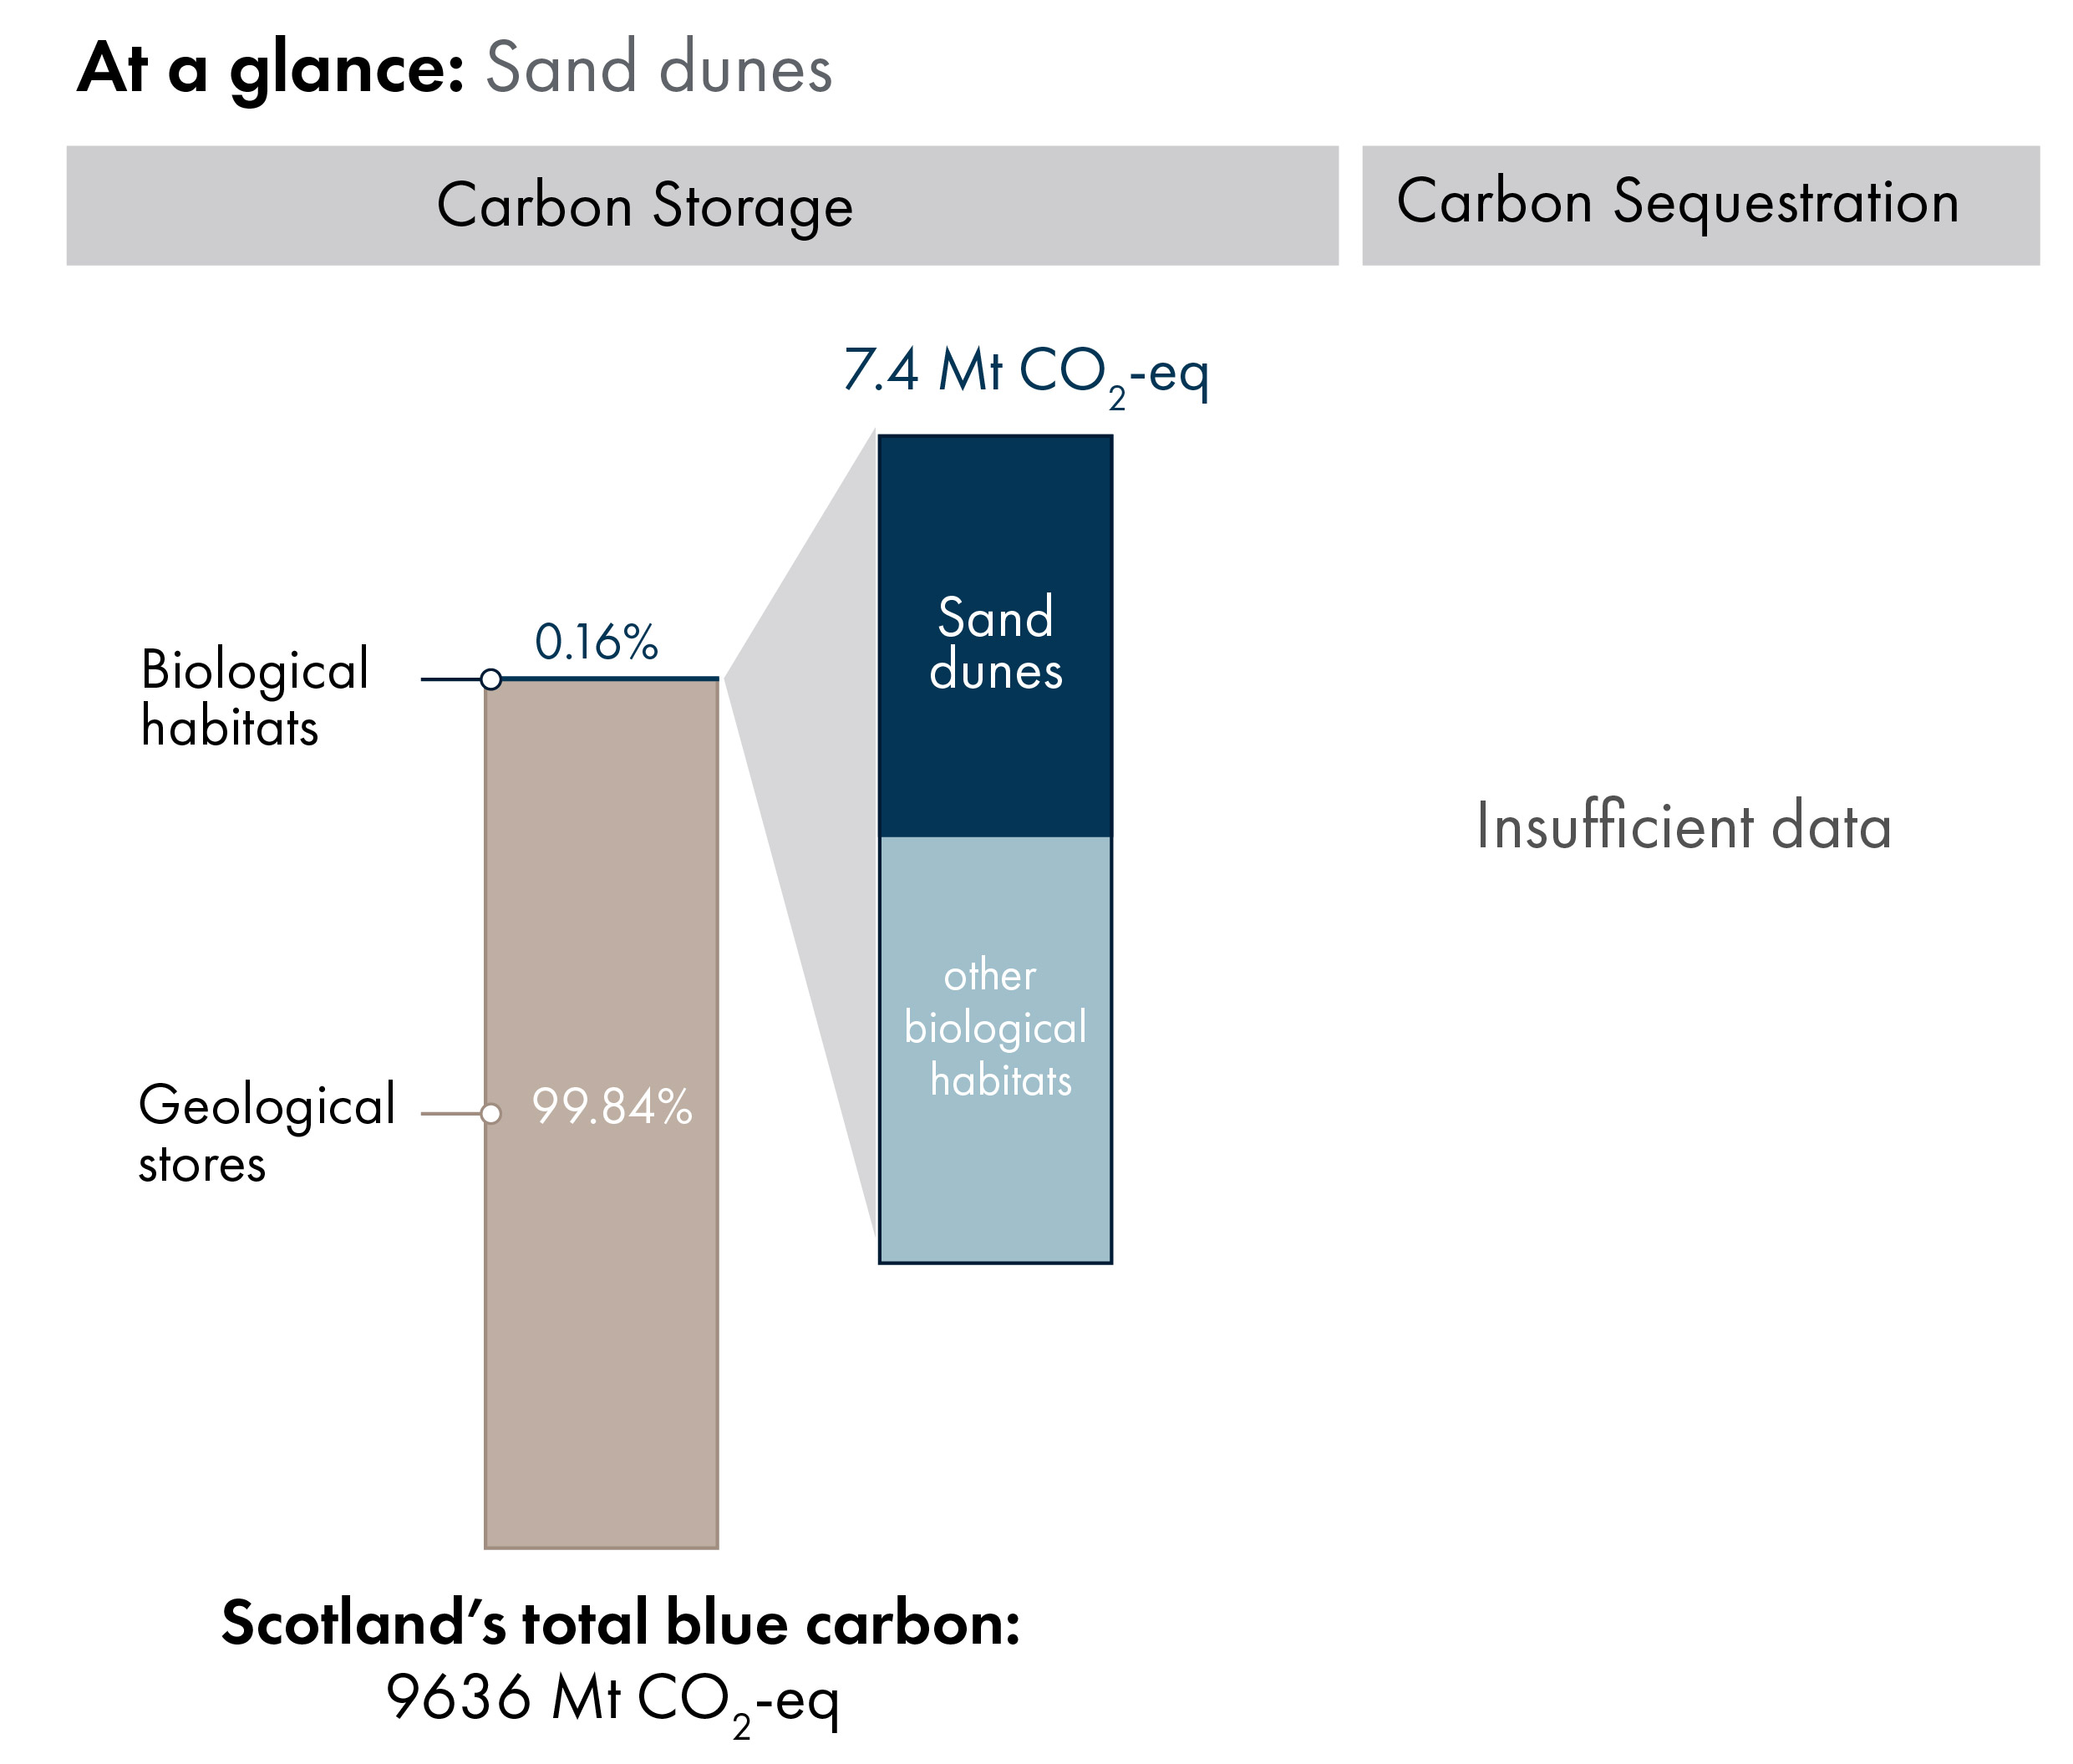 Bar charts showing the proportion of Scotland's blue carbon which is in geological stores (99.84%) versus carbon in biological habitats and species (0.16%). Inset bar chart shows the proportion of carbon in biological habitats which is sand dune carbon storage (7.4 megatonnes of carbon dioxide equivalent).